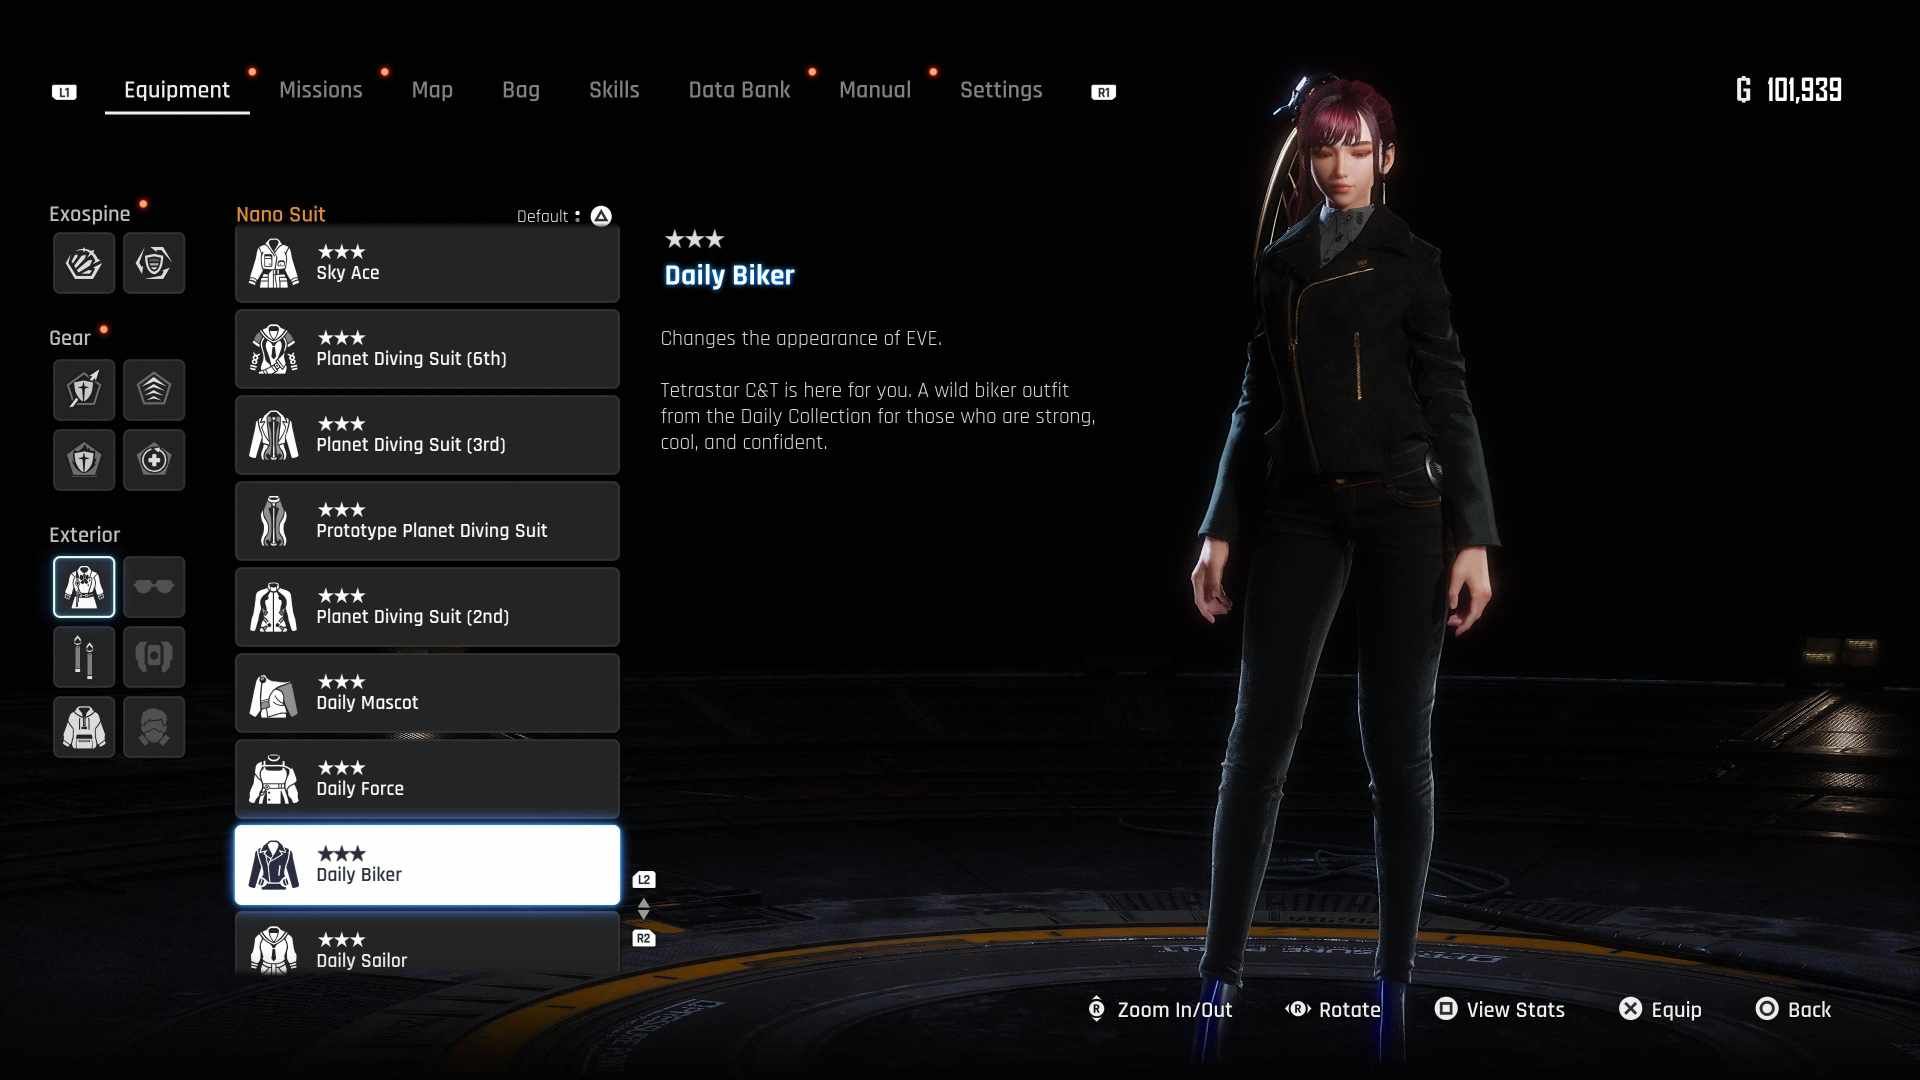 The Daily Biker Outfit in Stellar Blade